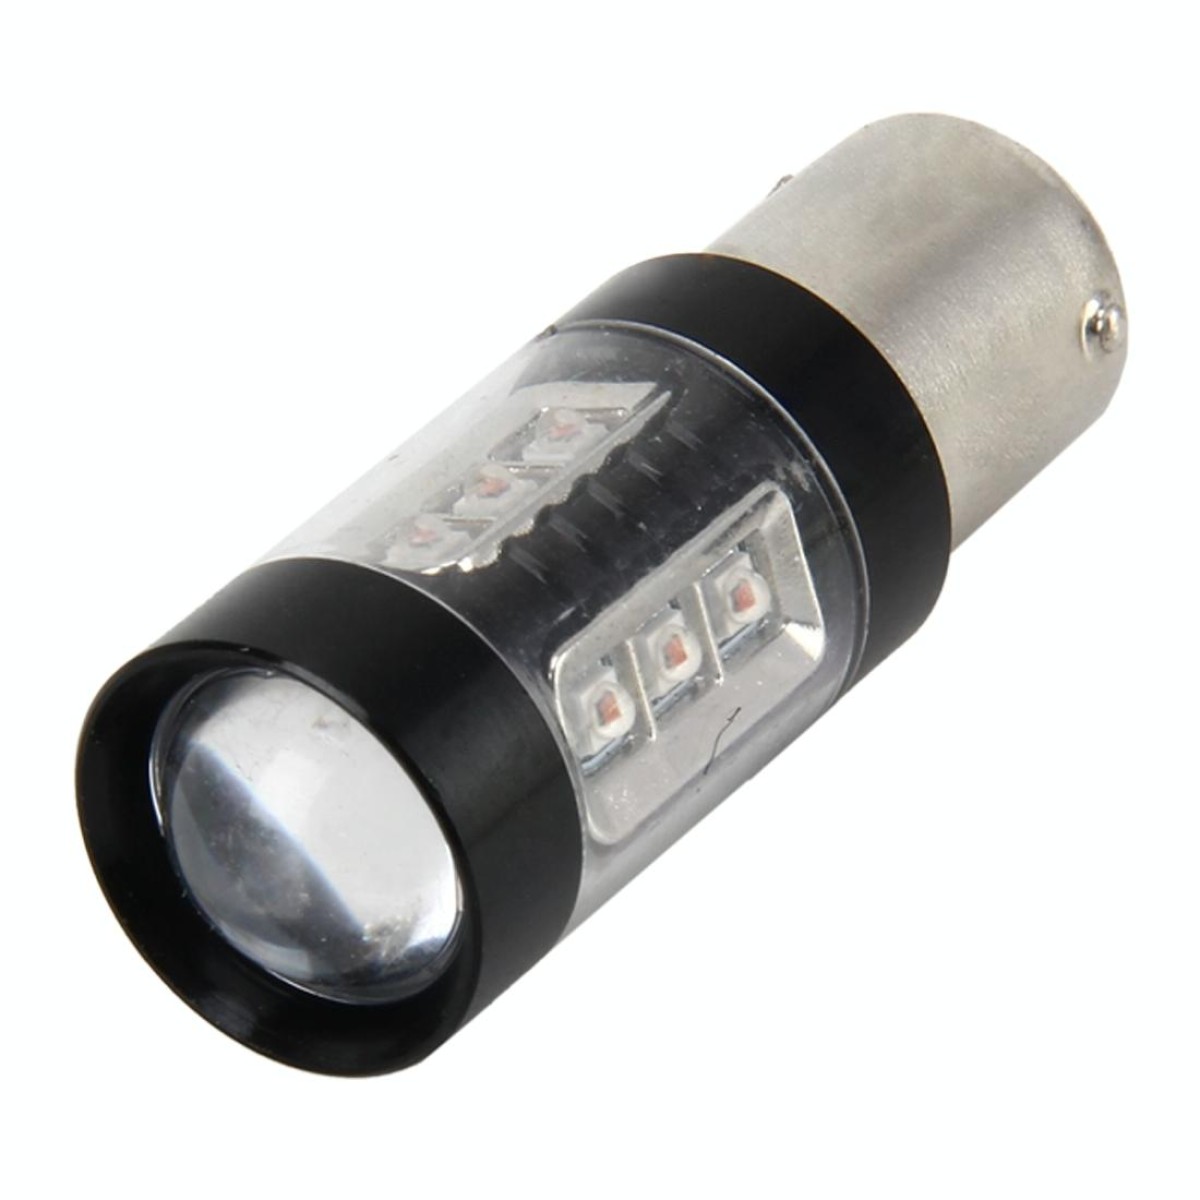 1156/BA15S 80W 1000 LM Car Auto Turn Light  Backup Light with 16  CREE Lamps, DC 12-24V(Yellow Light)